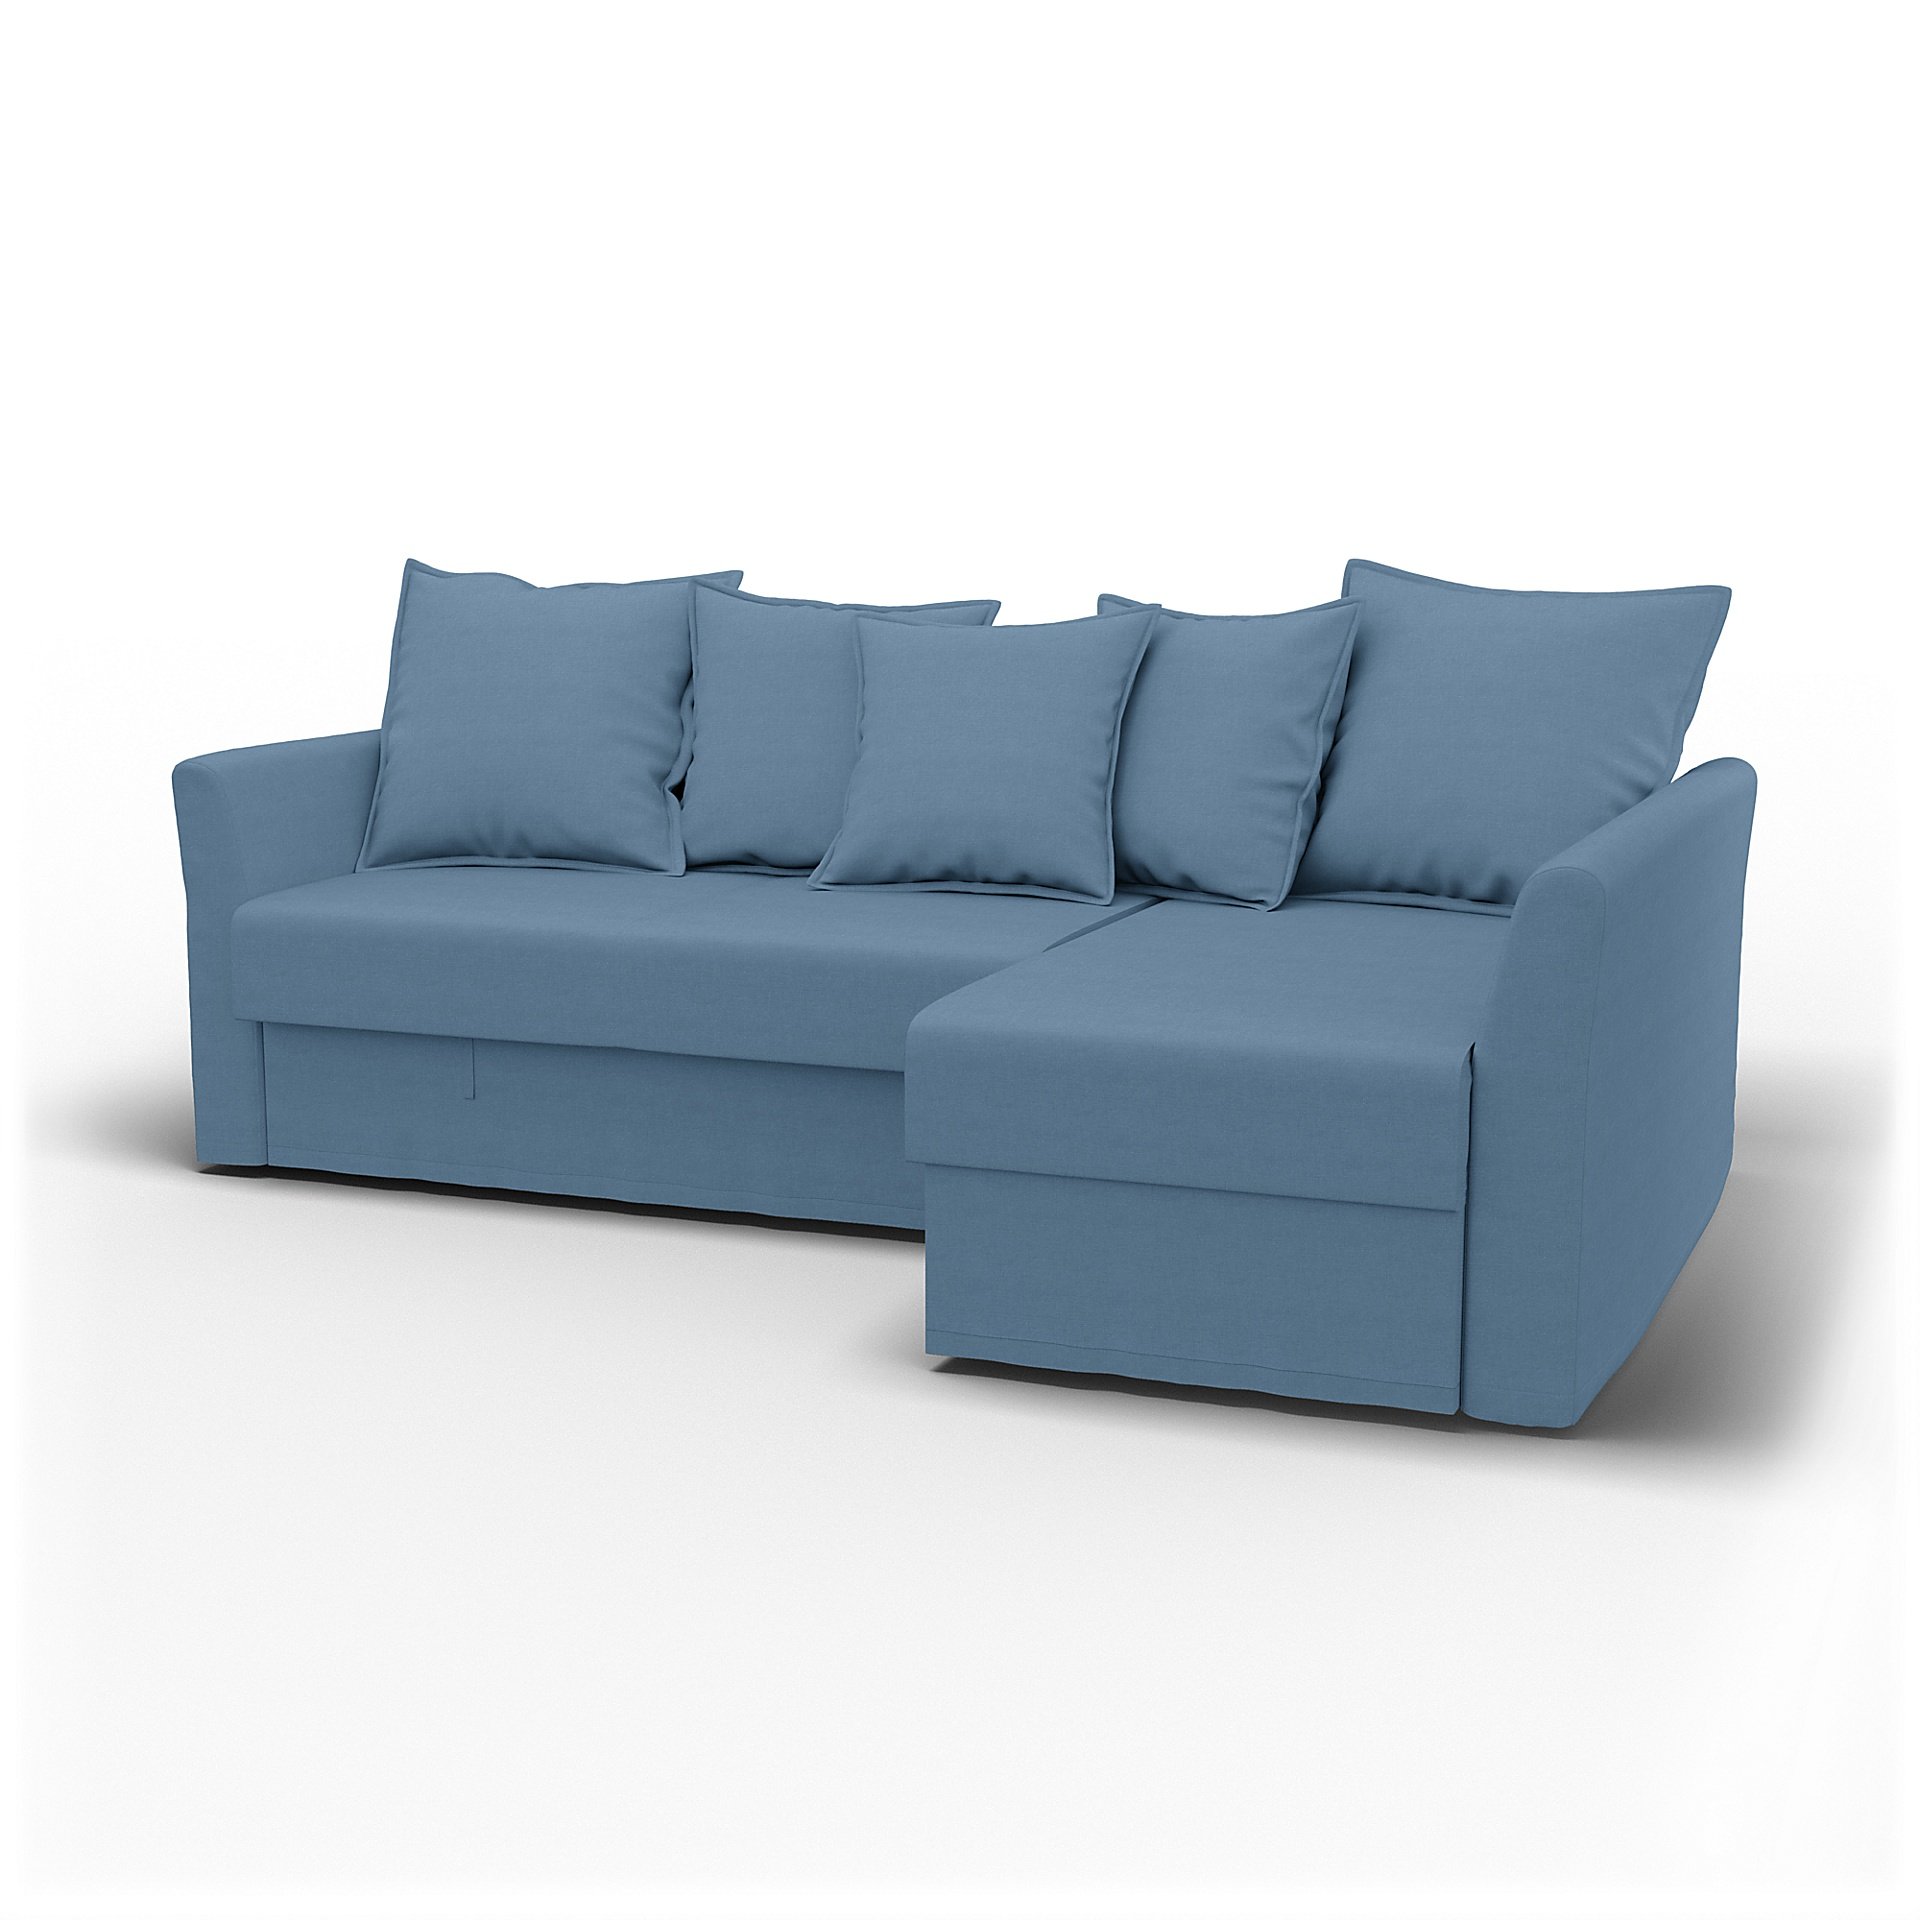 IKEA - Holmsund Sofabed with Chaiselongue, Vintage Blue, Linen - Bemz